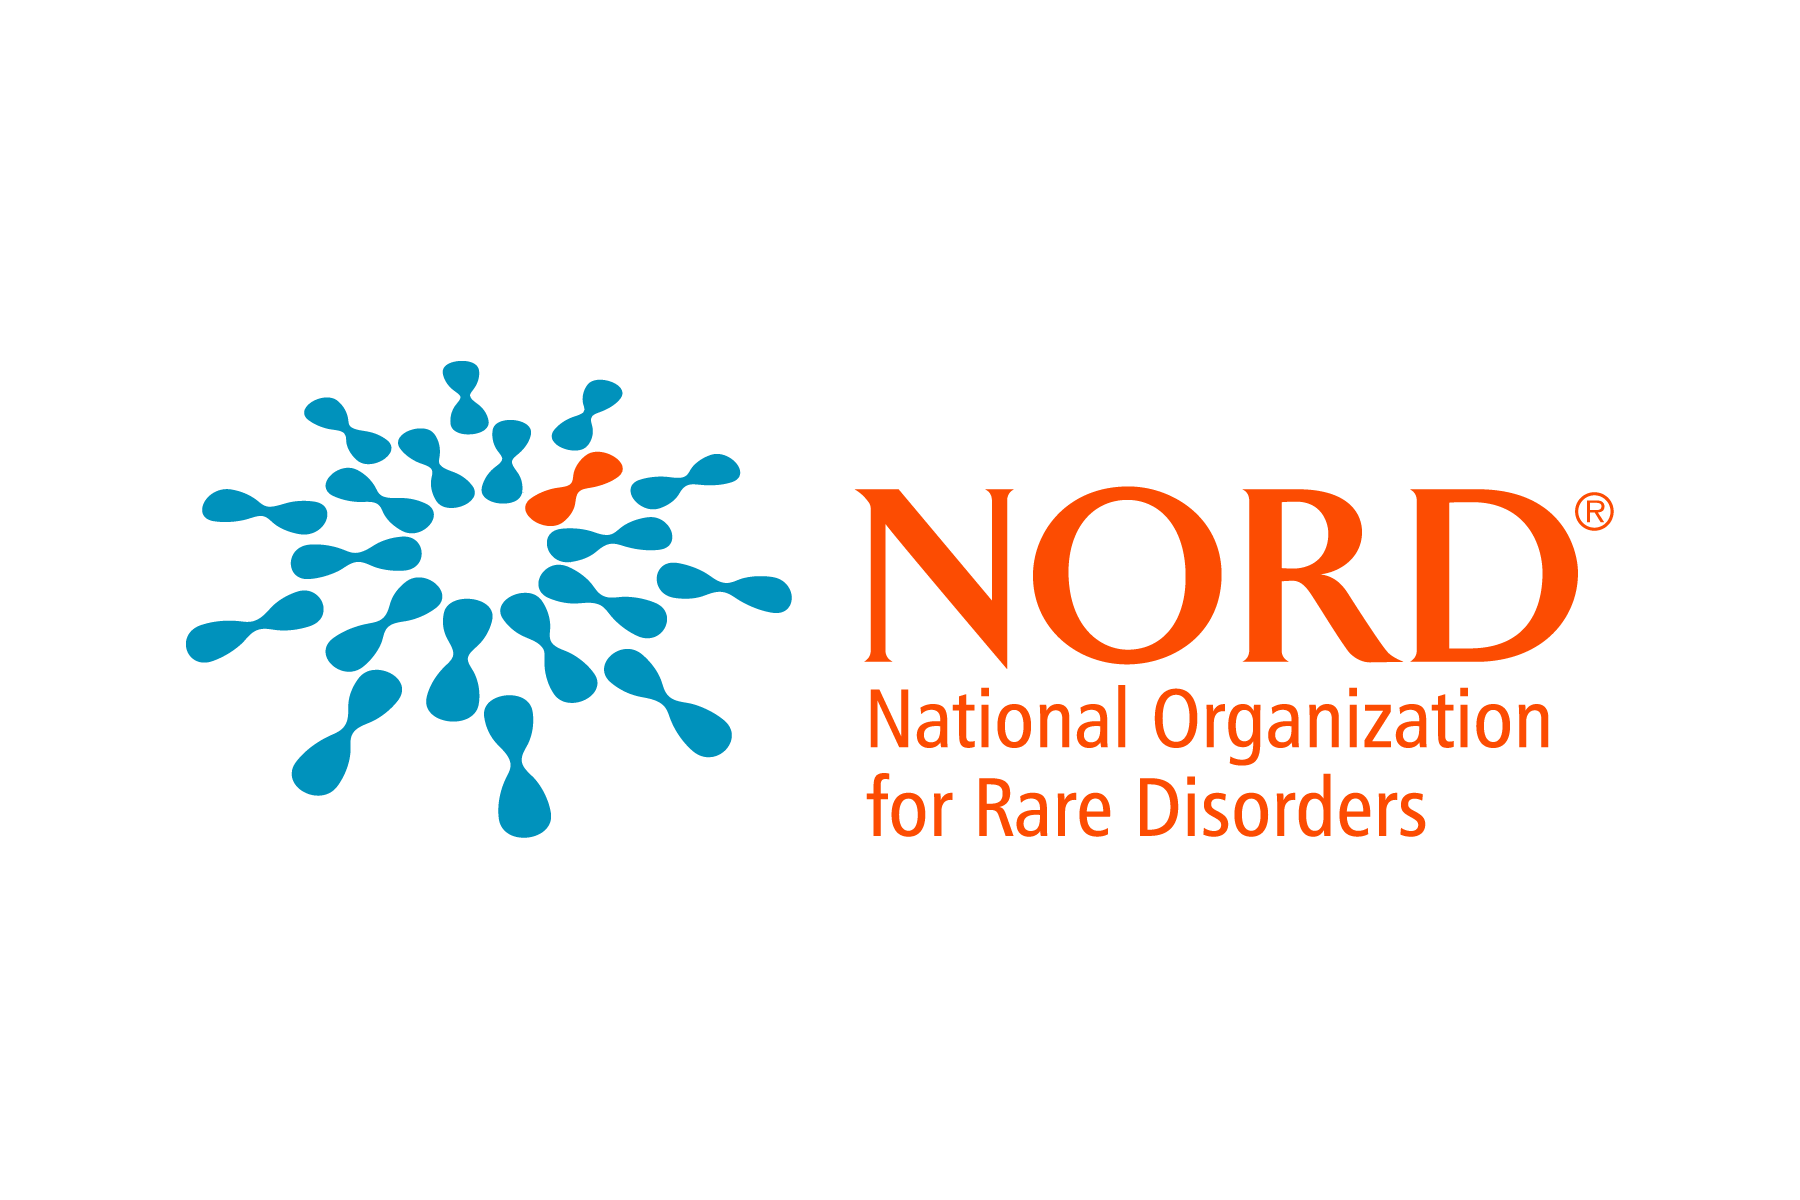 Copay Logo - NORD opposes implementation of copay accumulator programs in health